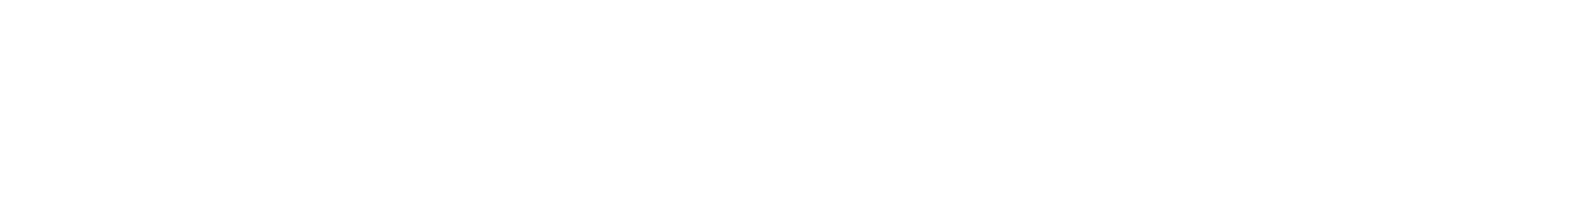 Carlyle Group logo large for dark backgrounds (transparent PNG)